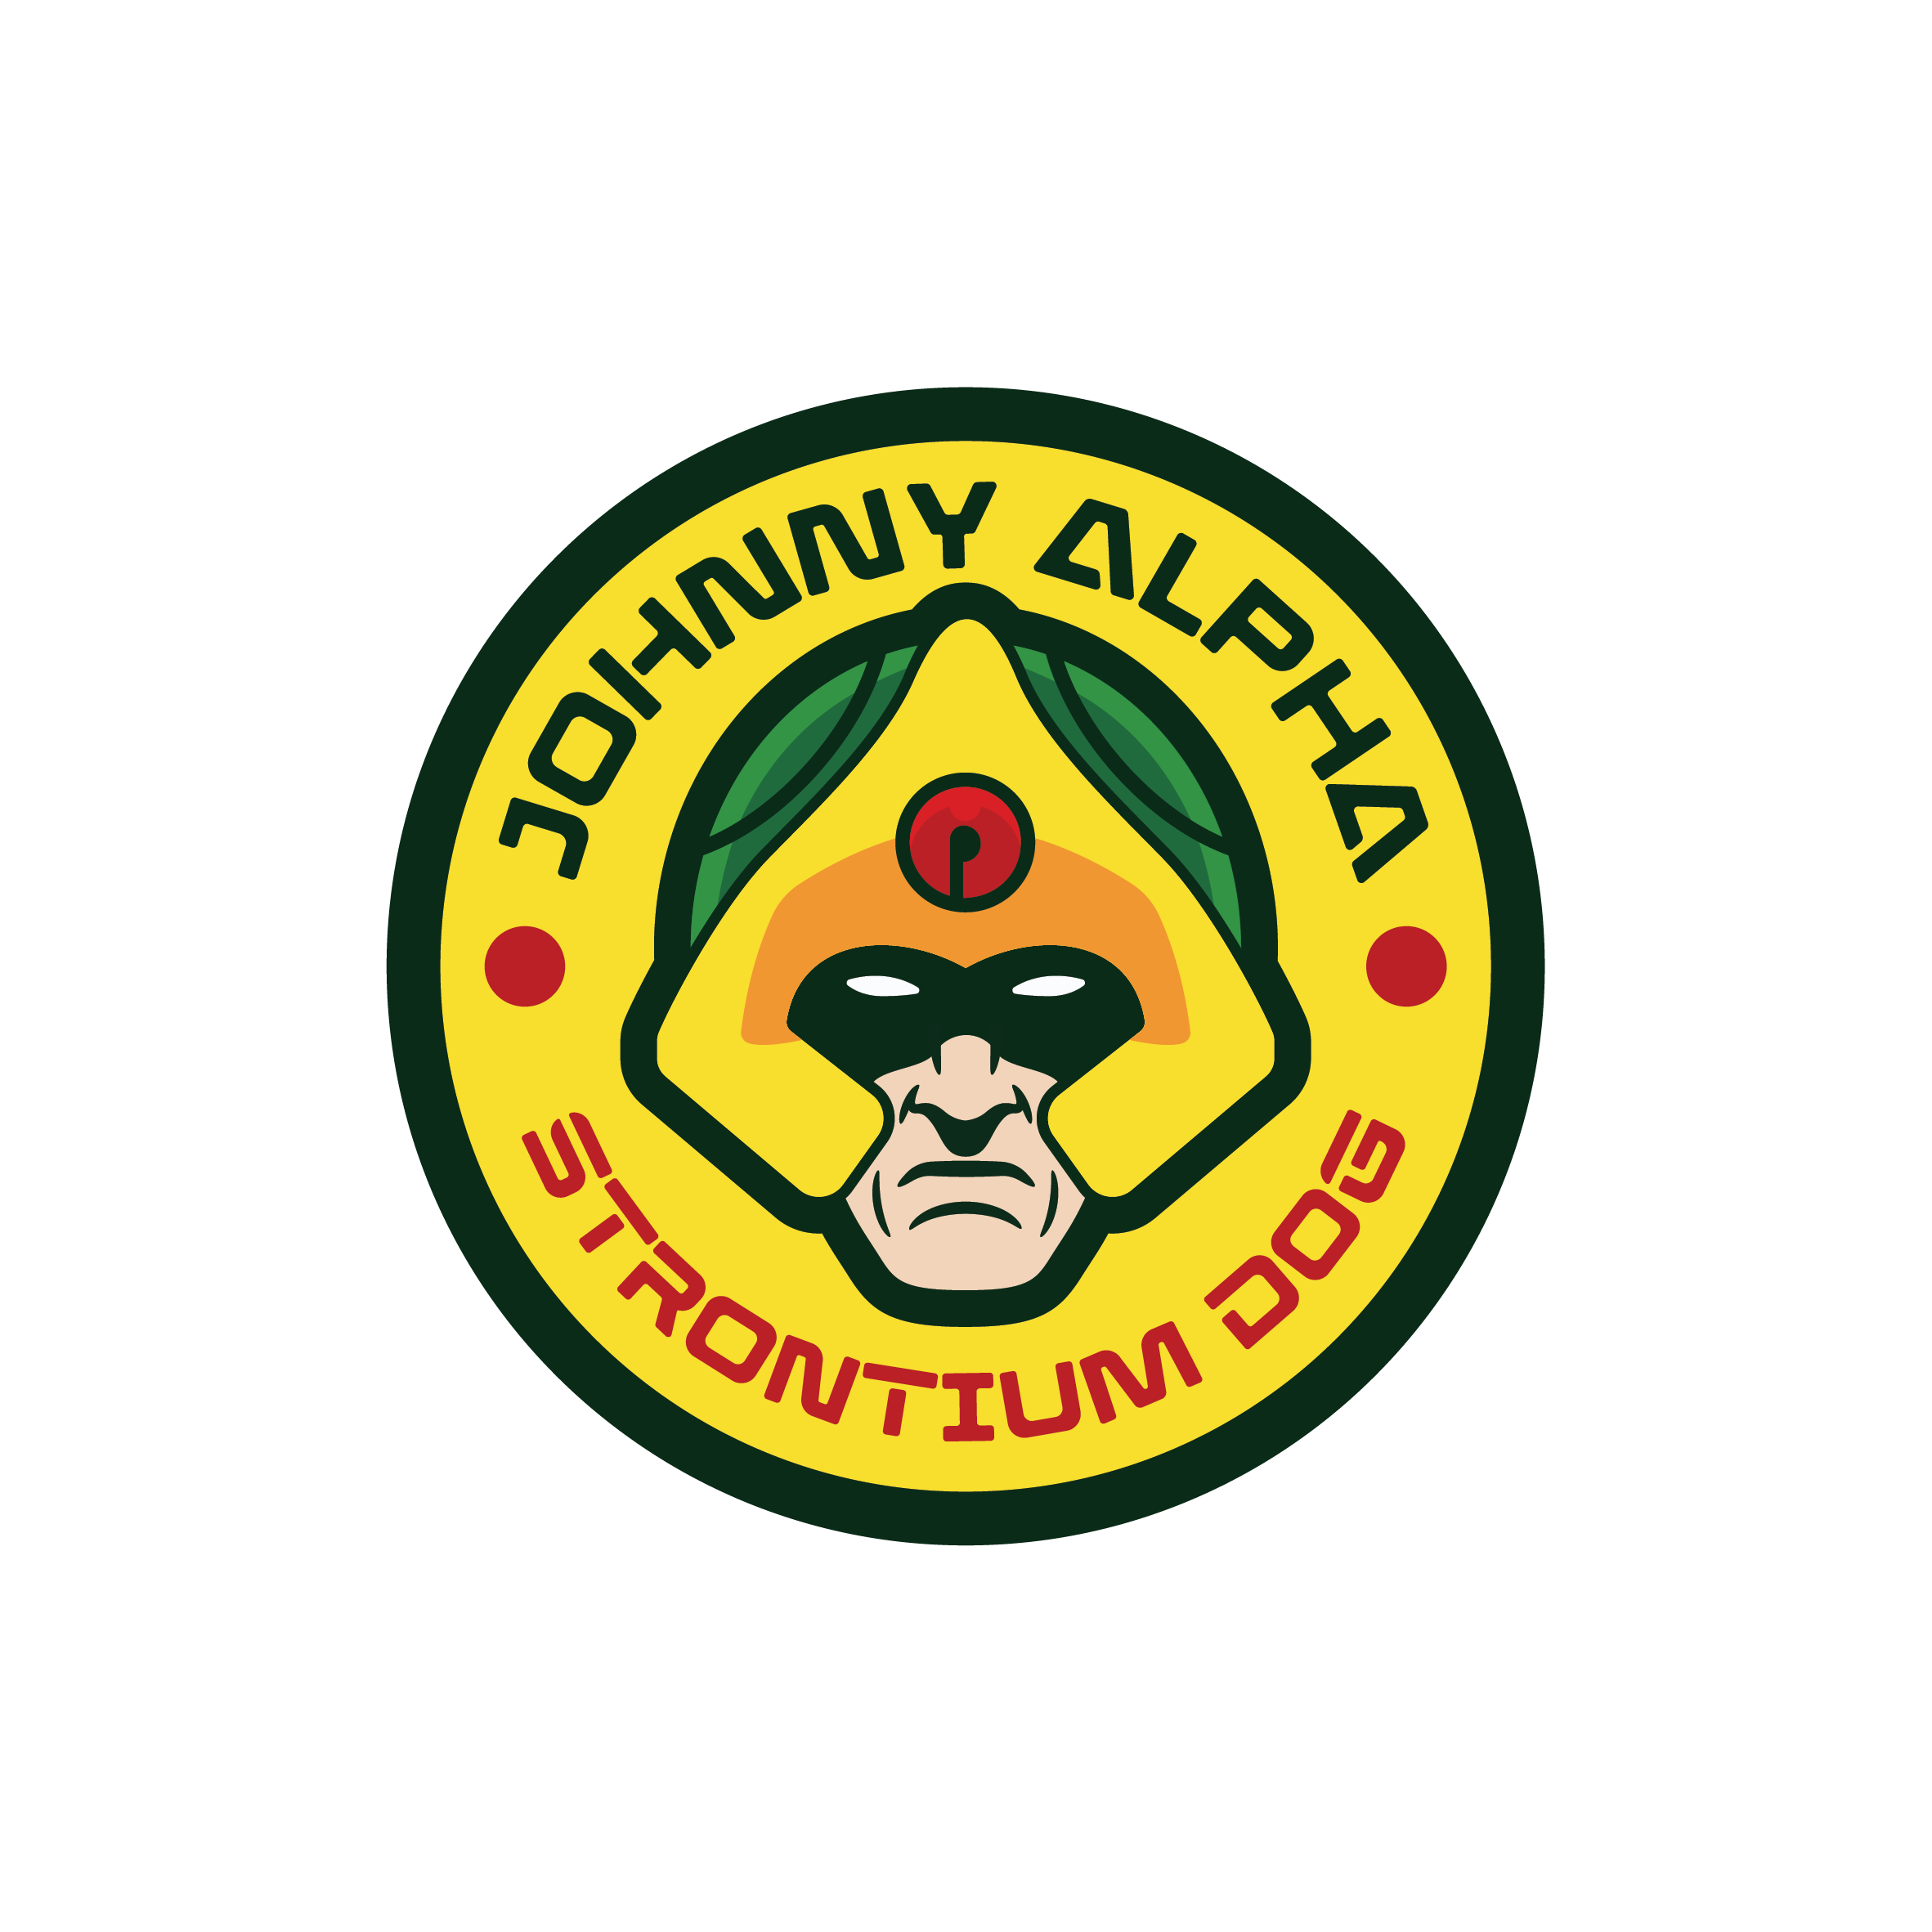 Strontium Dog logo design by logo designer Tortoiseshell Black for your inspiration and for the worlds largest logo competition